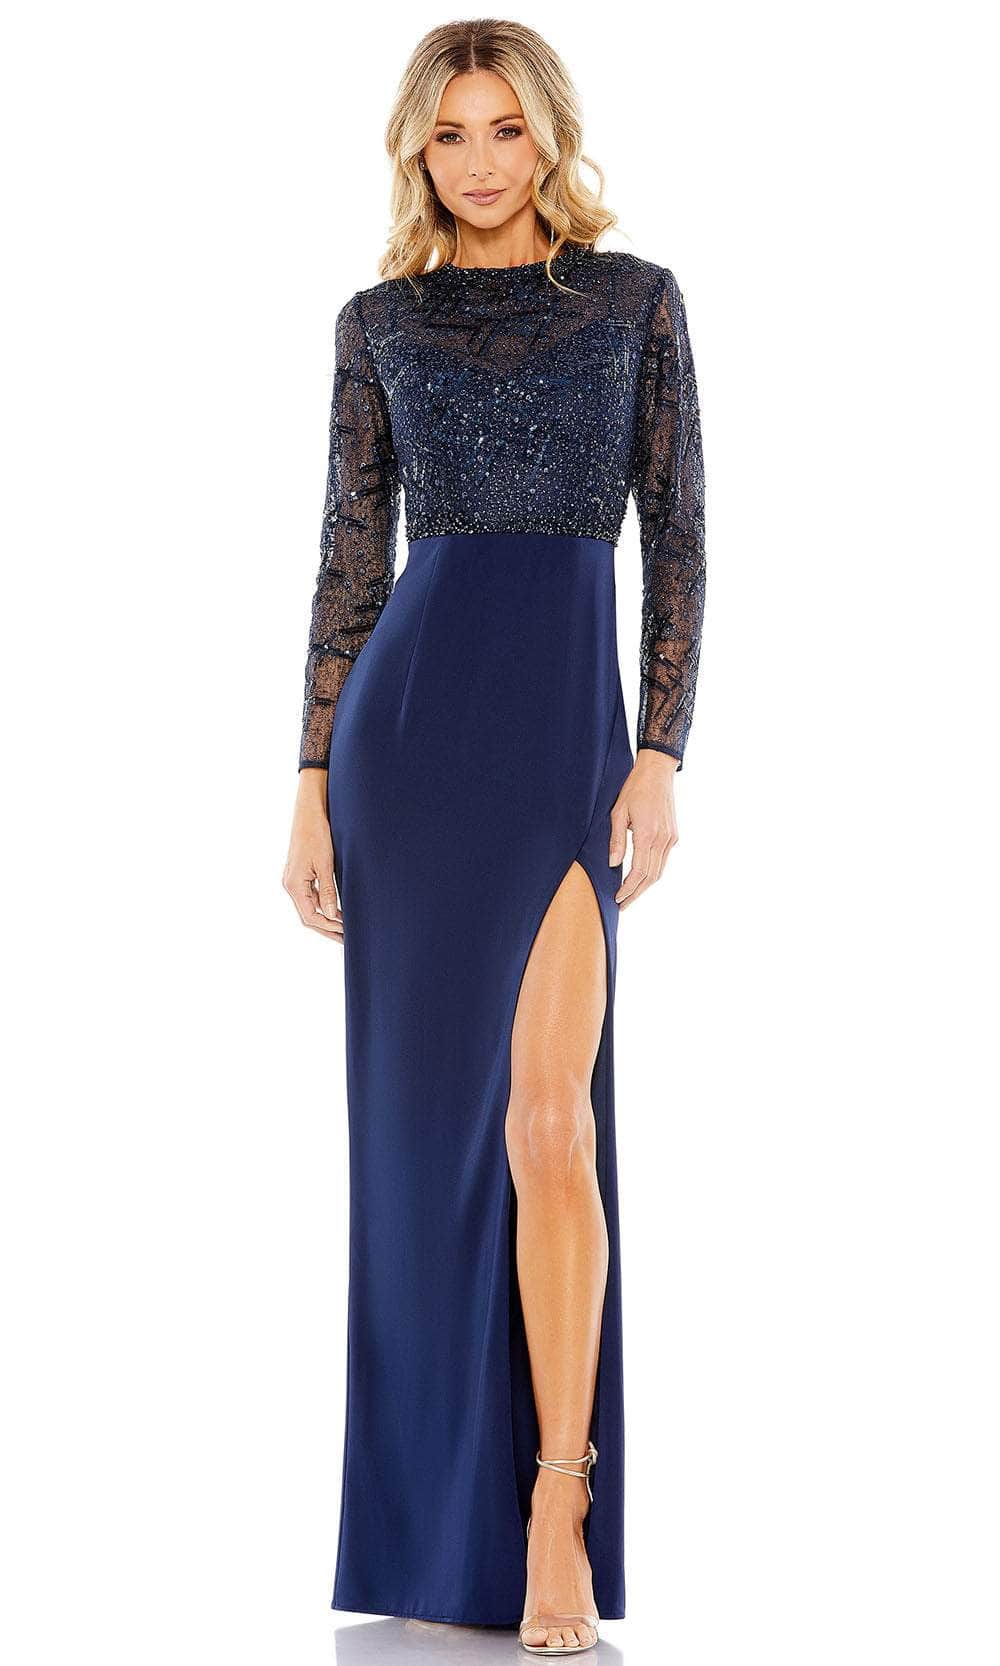 Image of Mac Duggal 20340 - High Neck Embellished Fitted Bodice Evening Dress